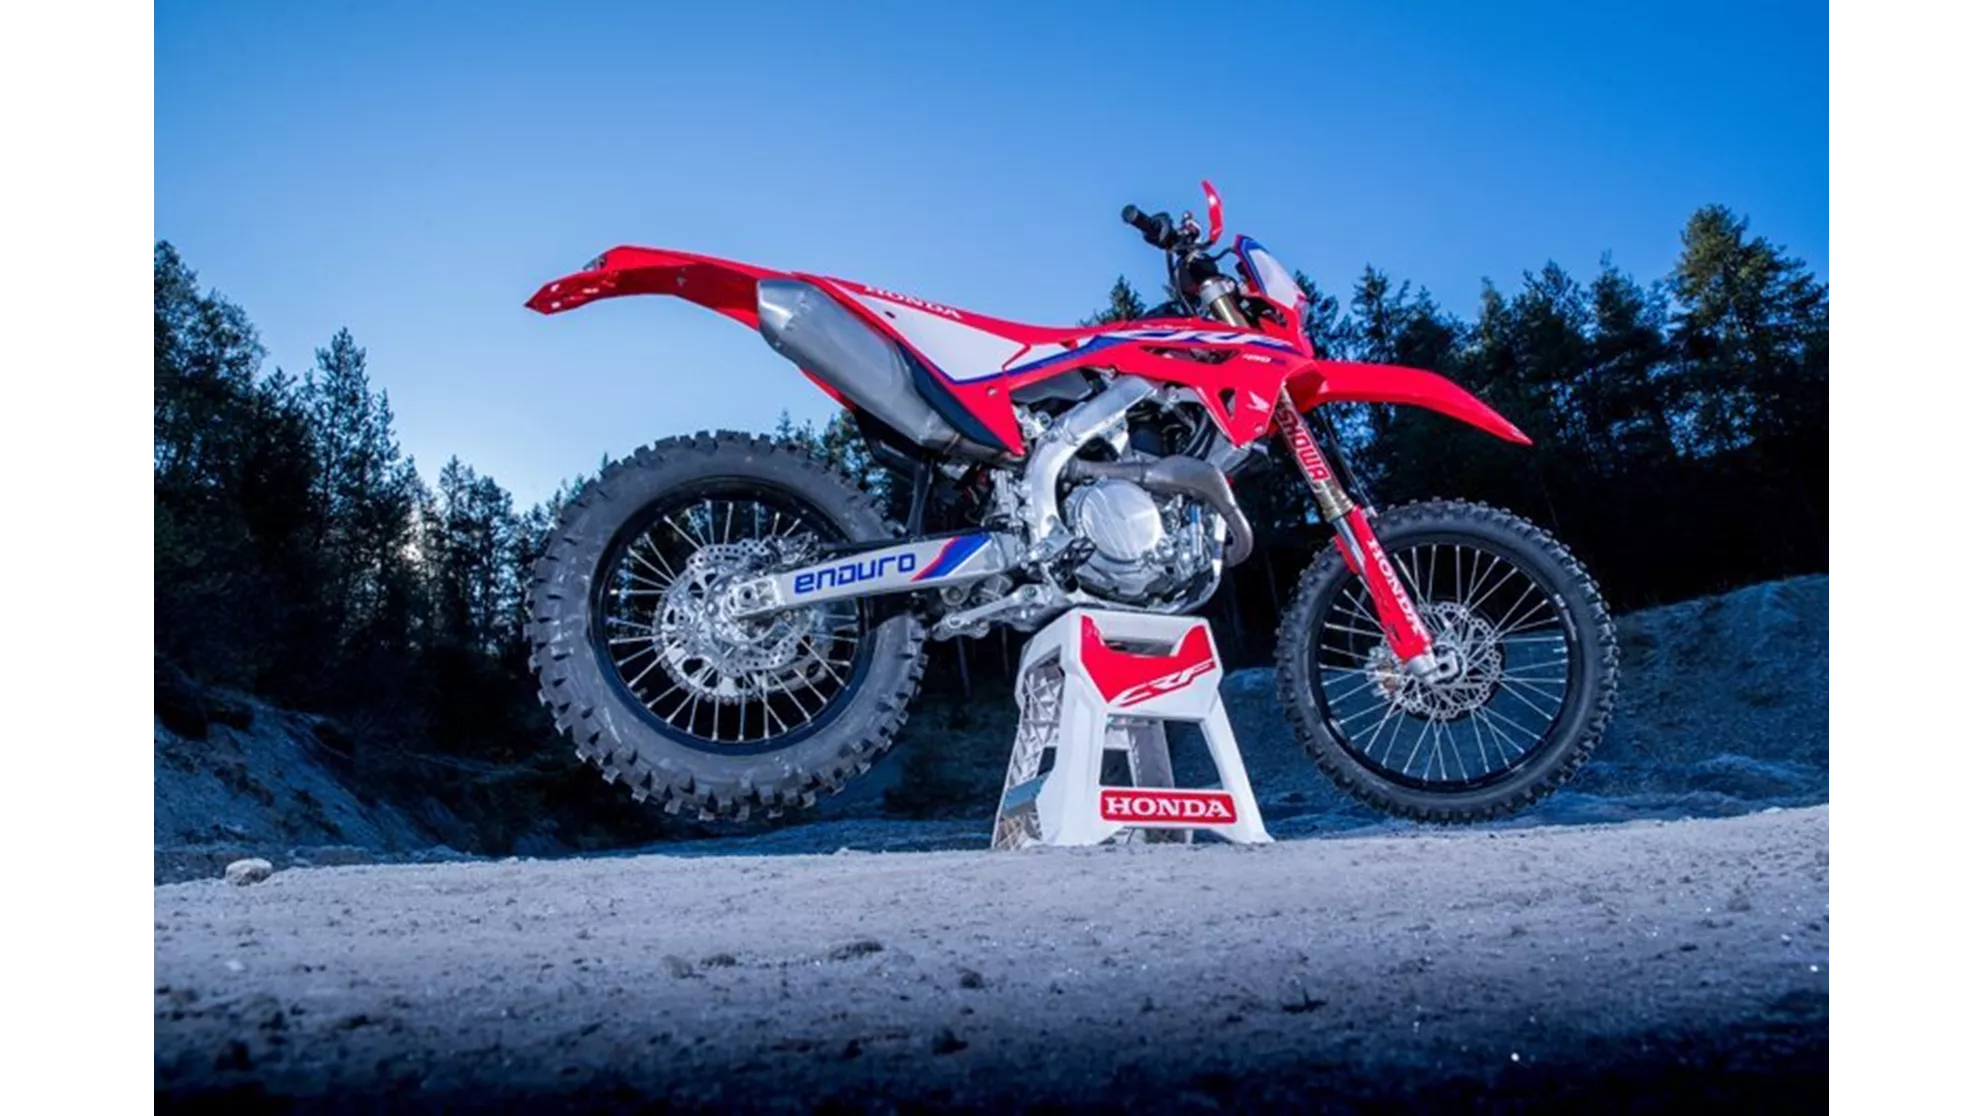 Red Moto CRF 450RX Enduro Special - Image 1